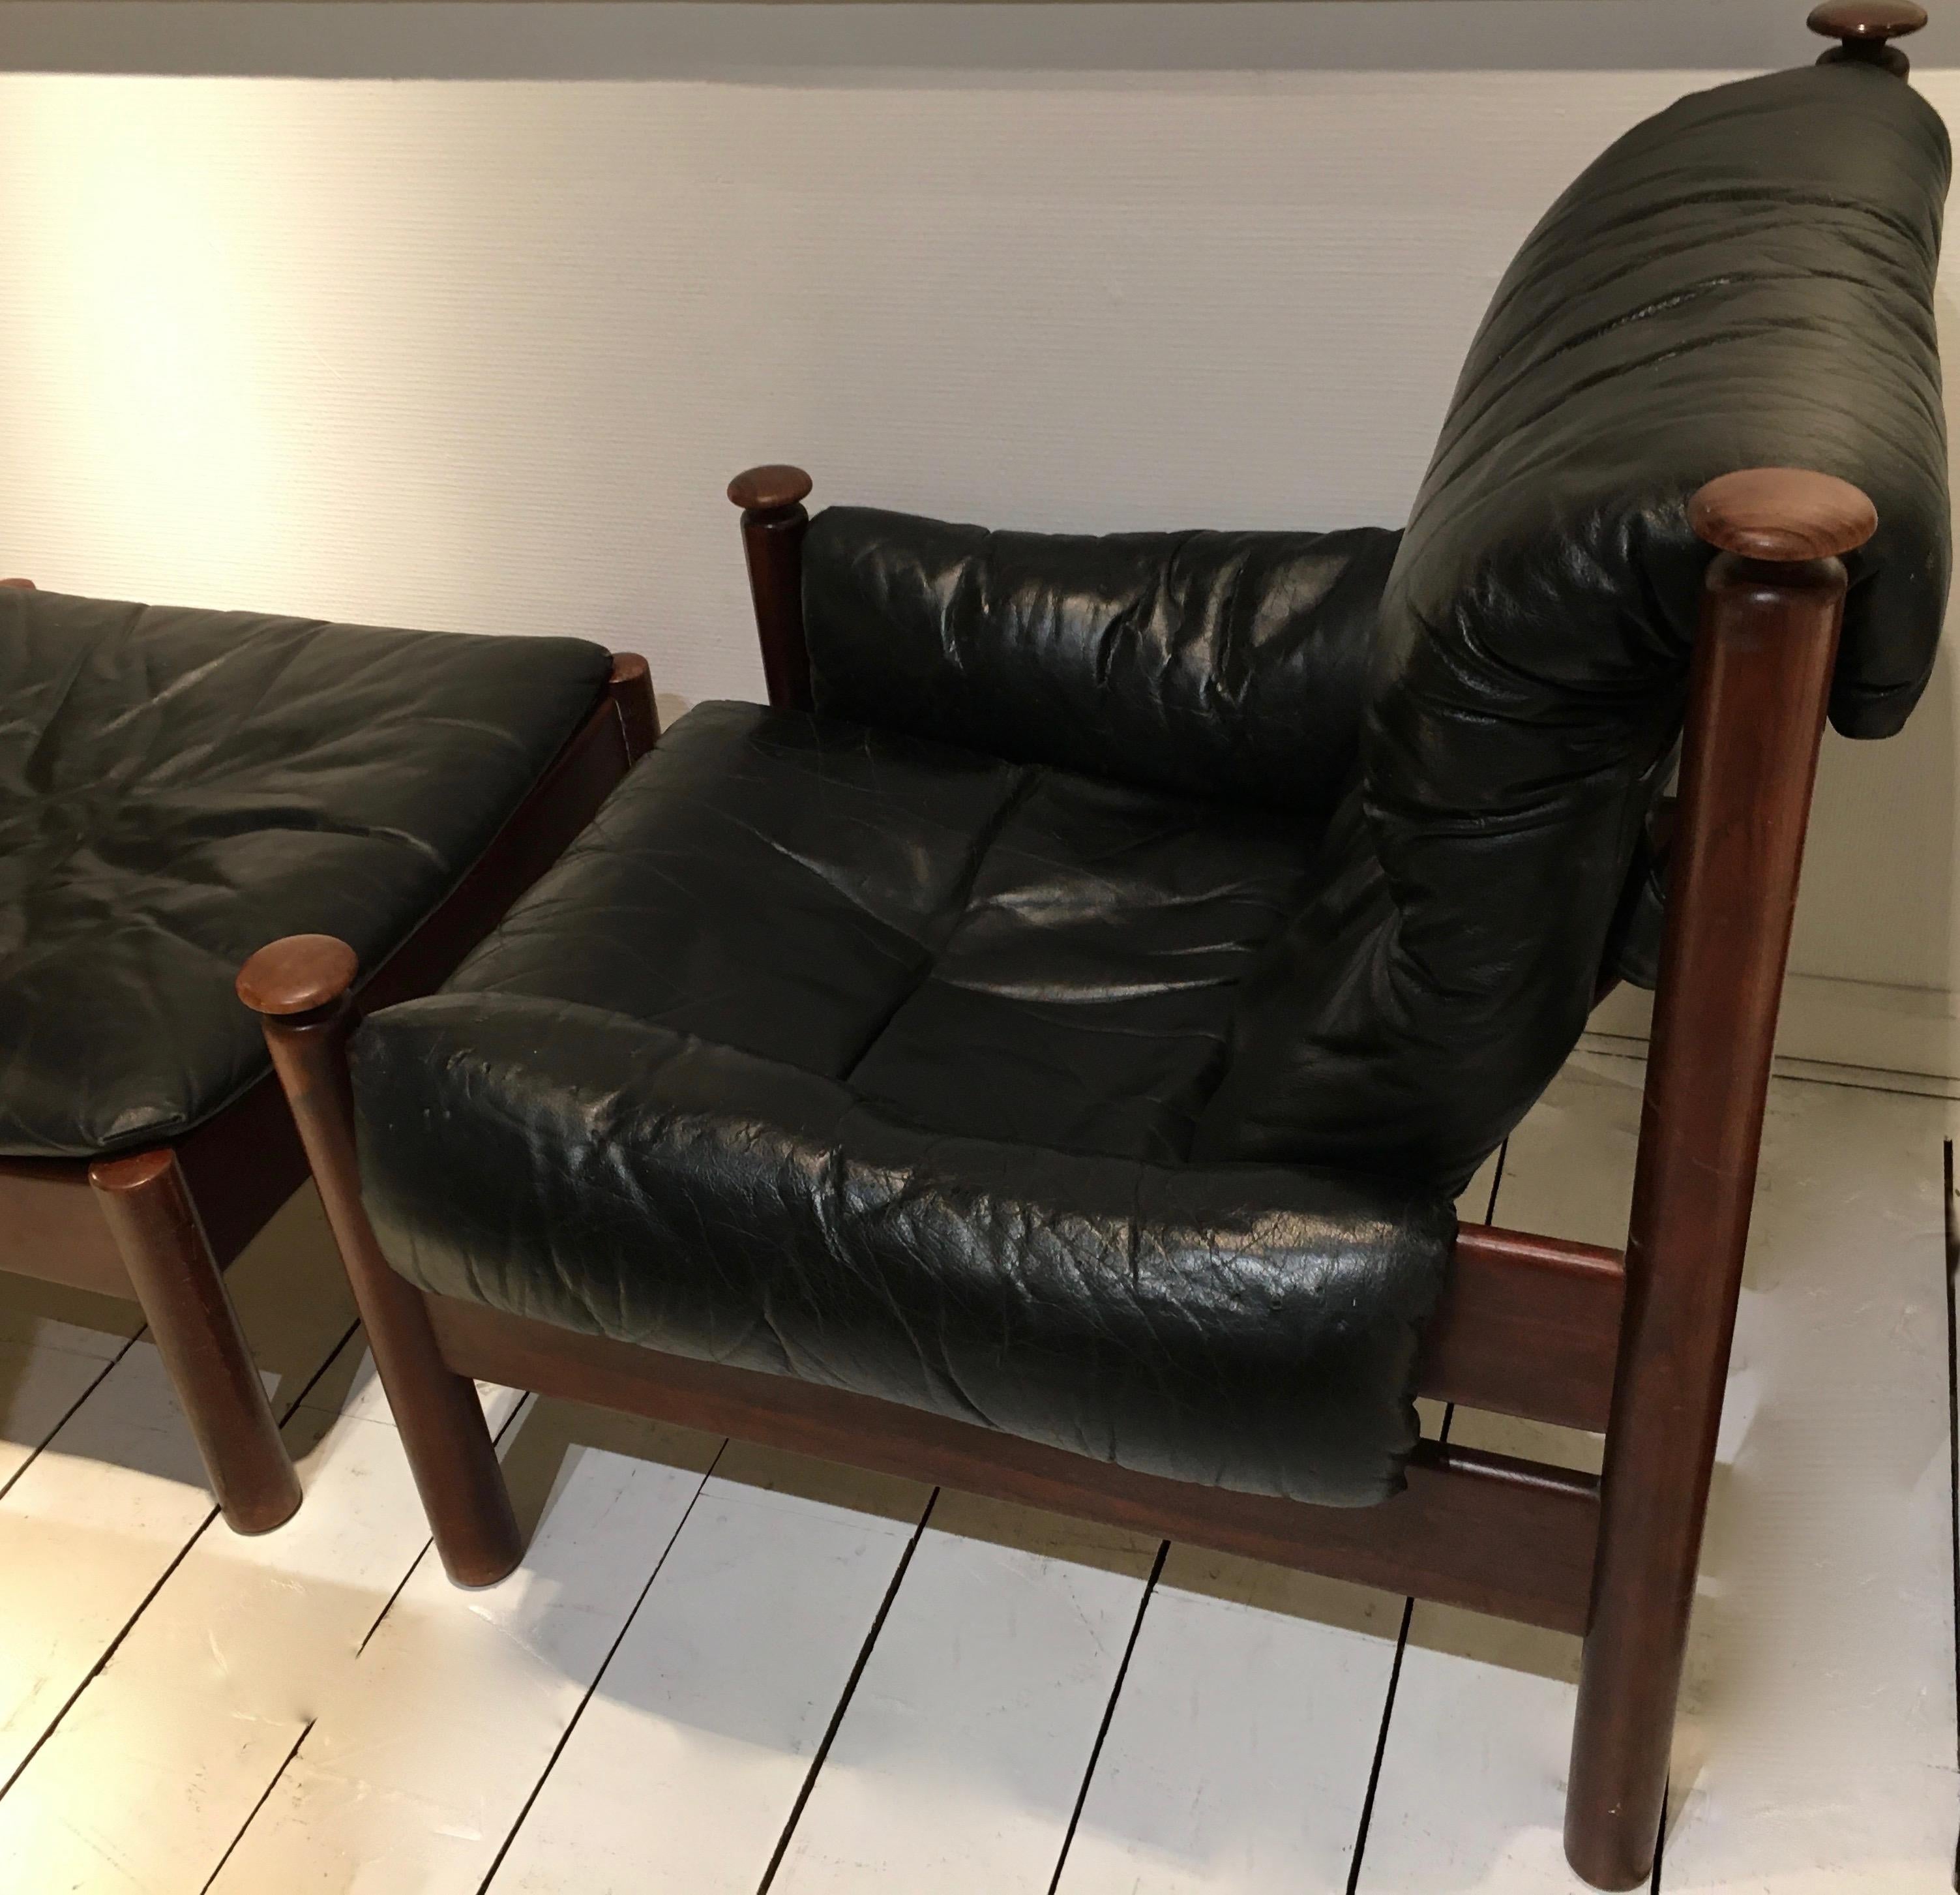 Mid-20th Century Teak and Leather Armchair and Ottoman by Eric Merthen, Sweden 1960.